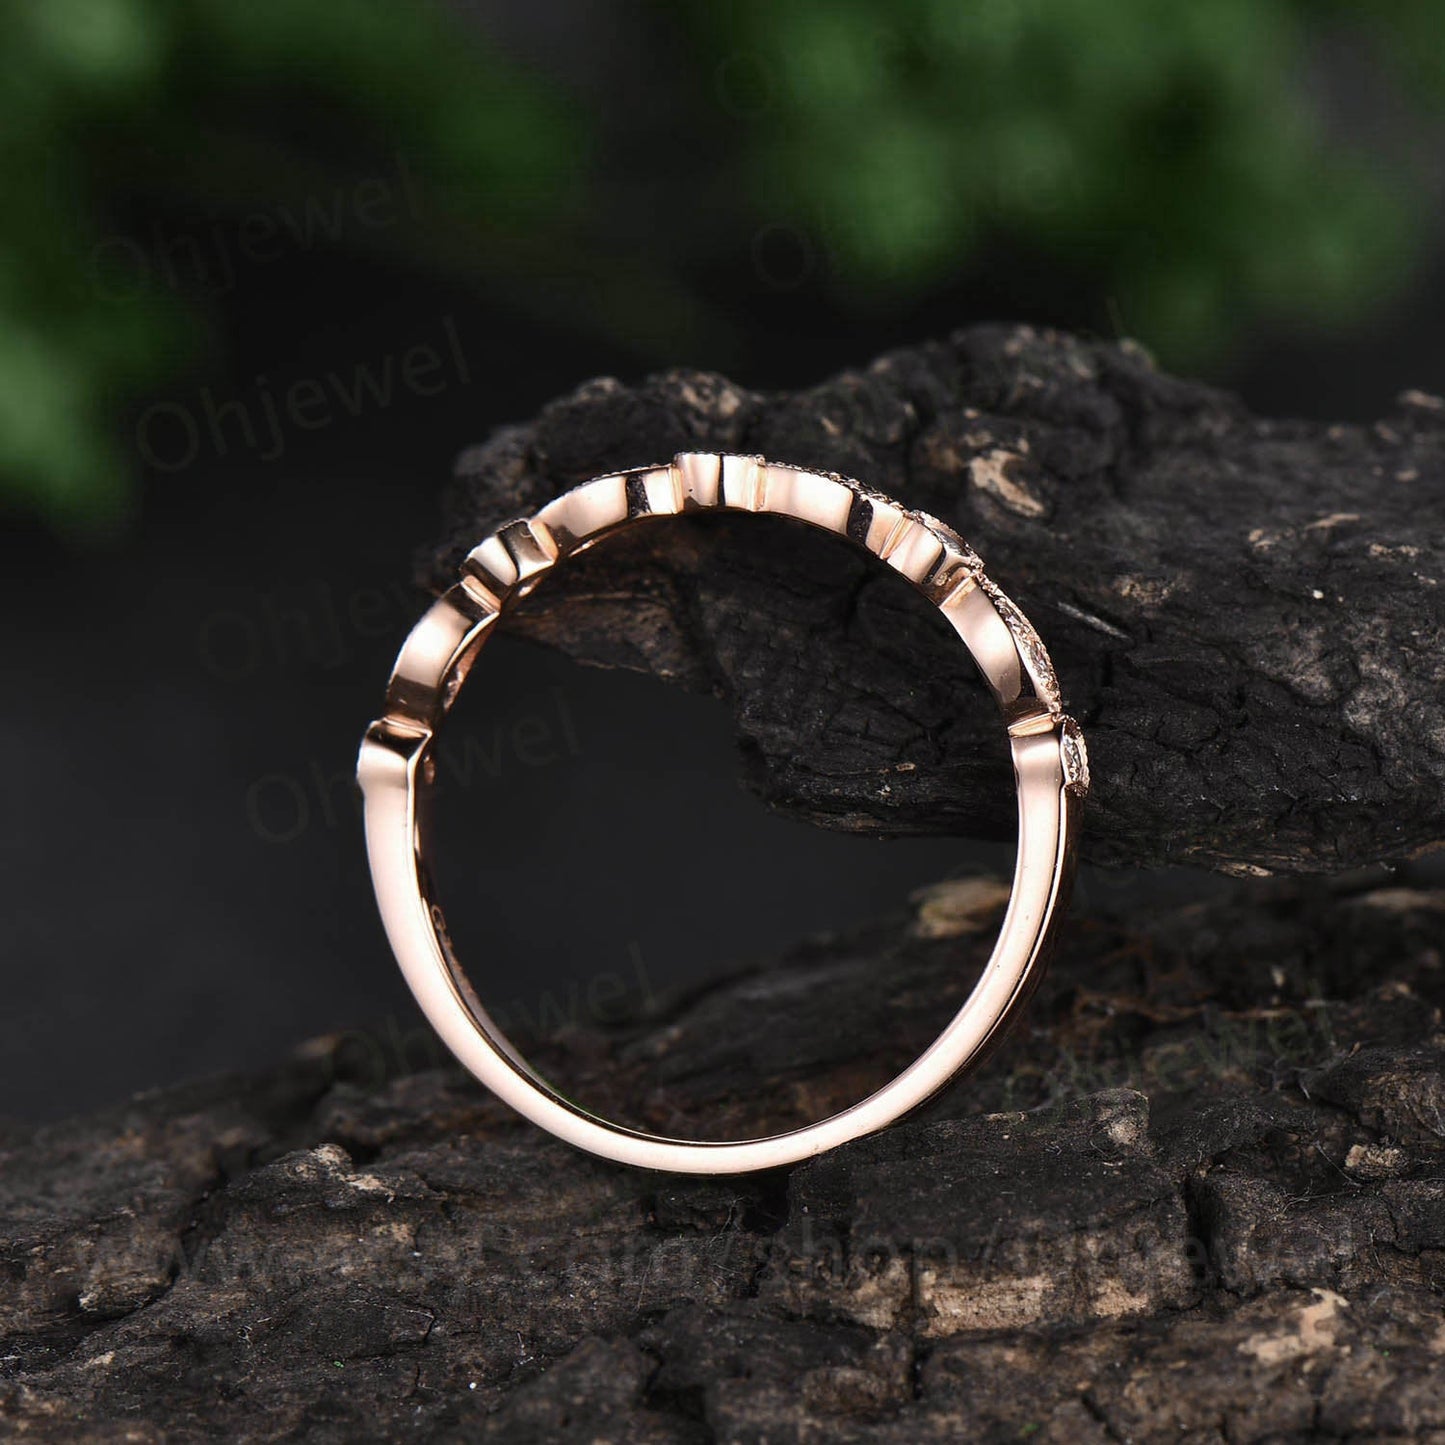 Rose gold ring real diamond ring vintage diamond wedding band art deco ring half eternity ring anniversary ring graduation gift for her